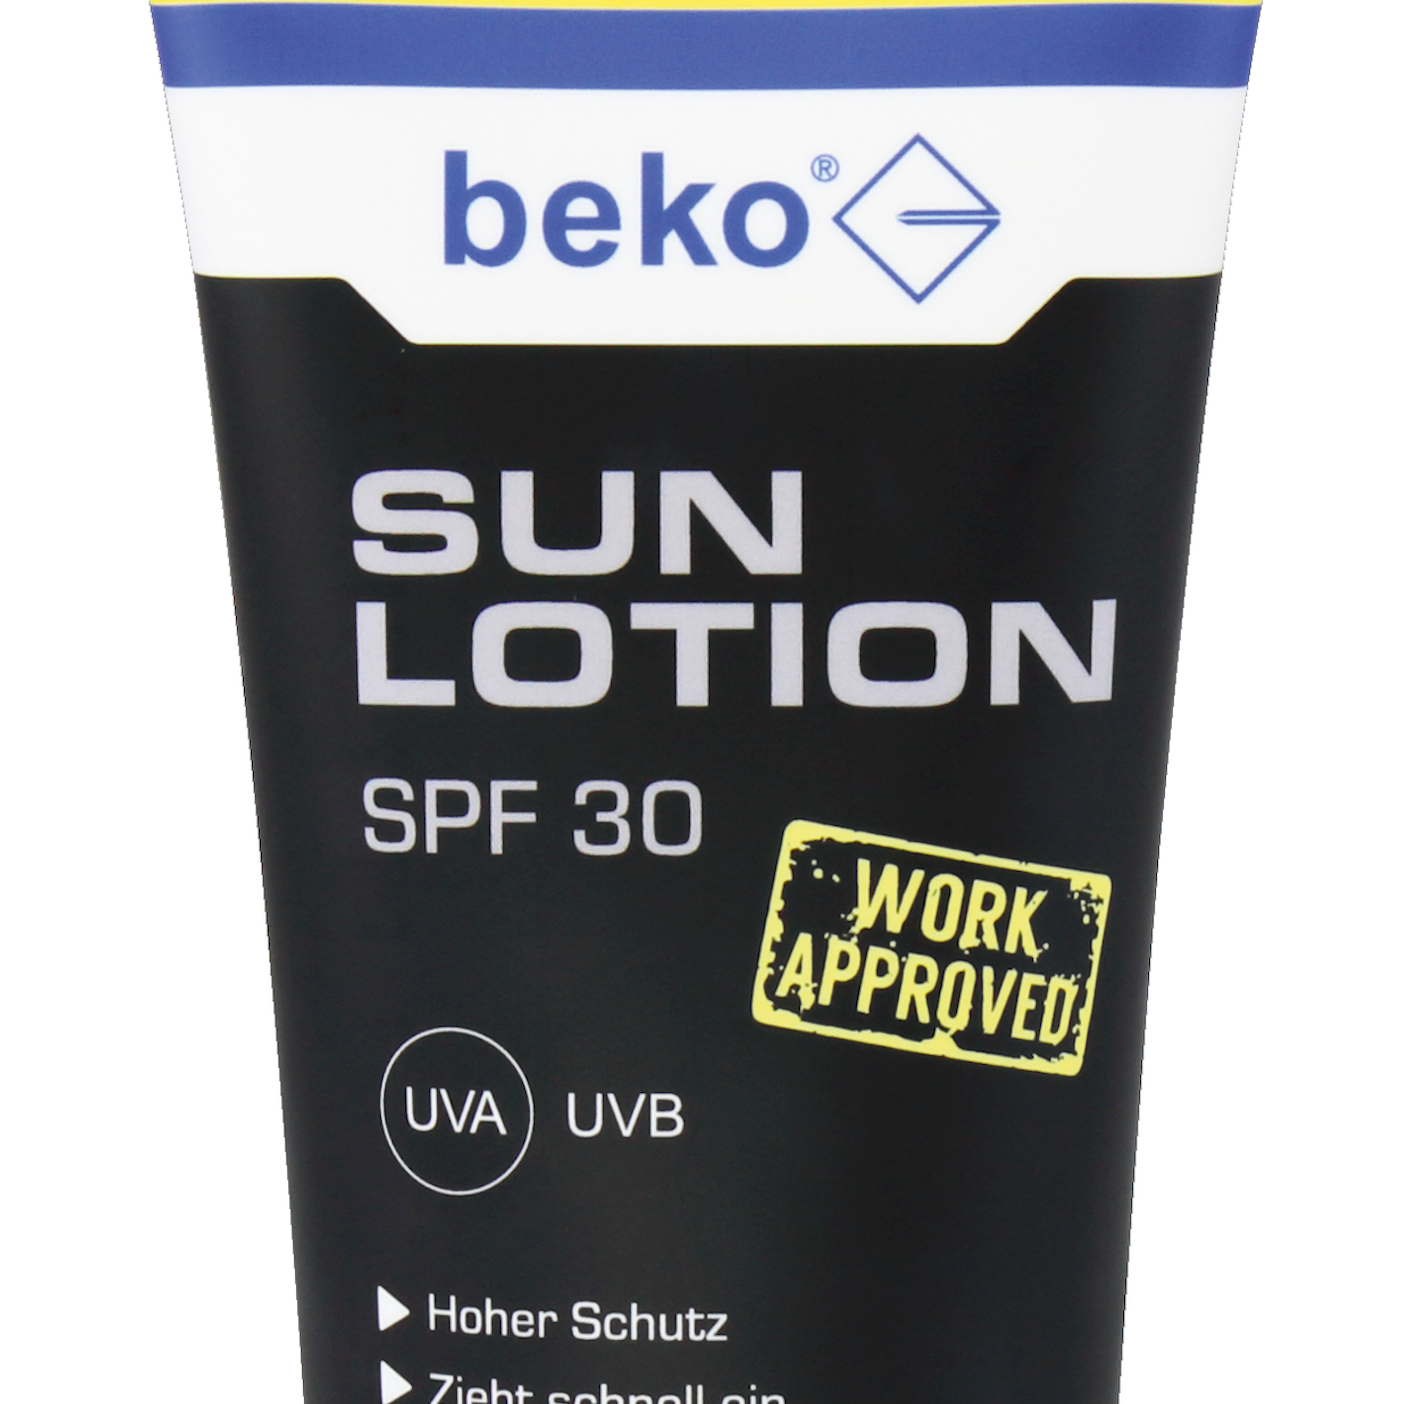 beko® Sun-Lotion (Work Approved)